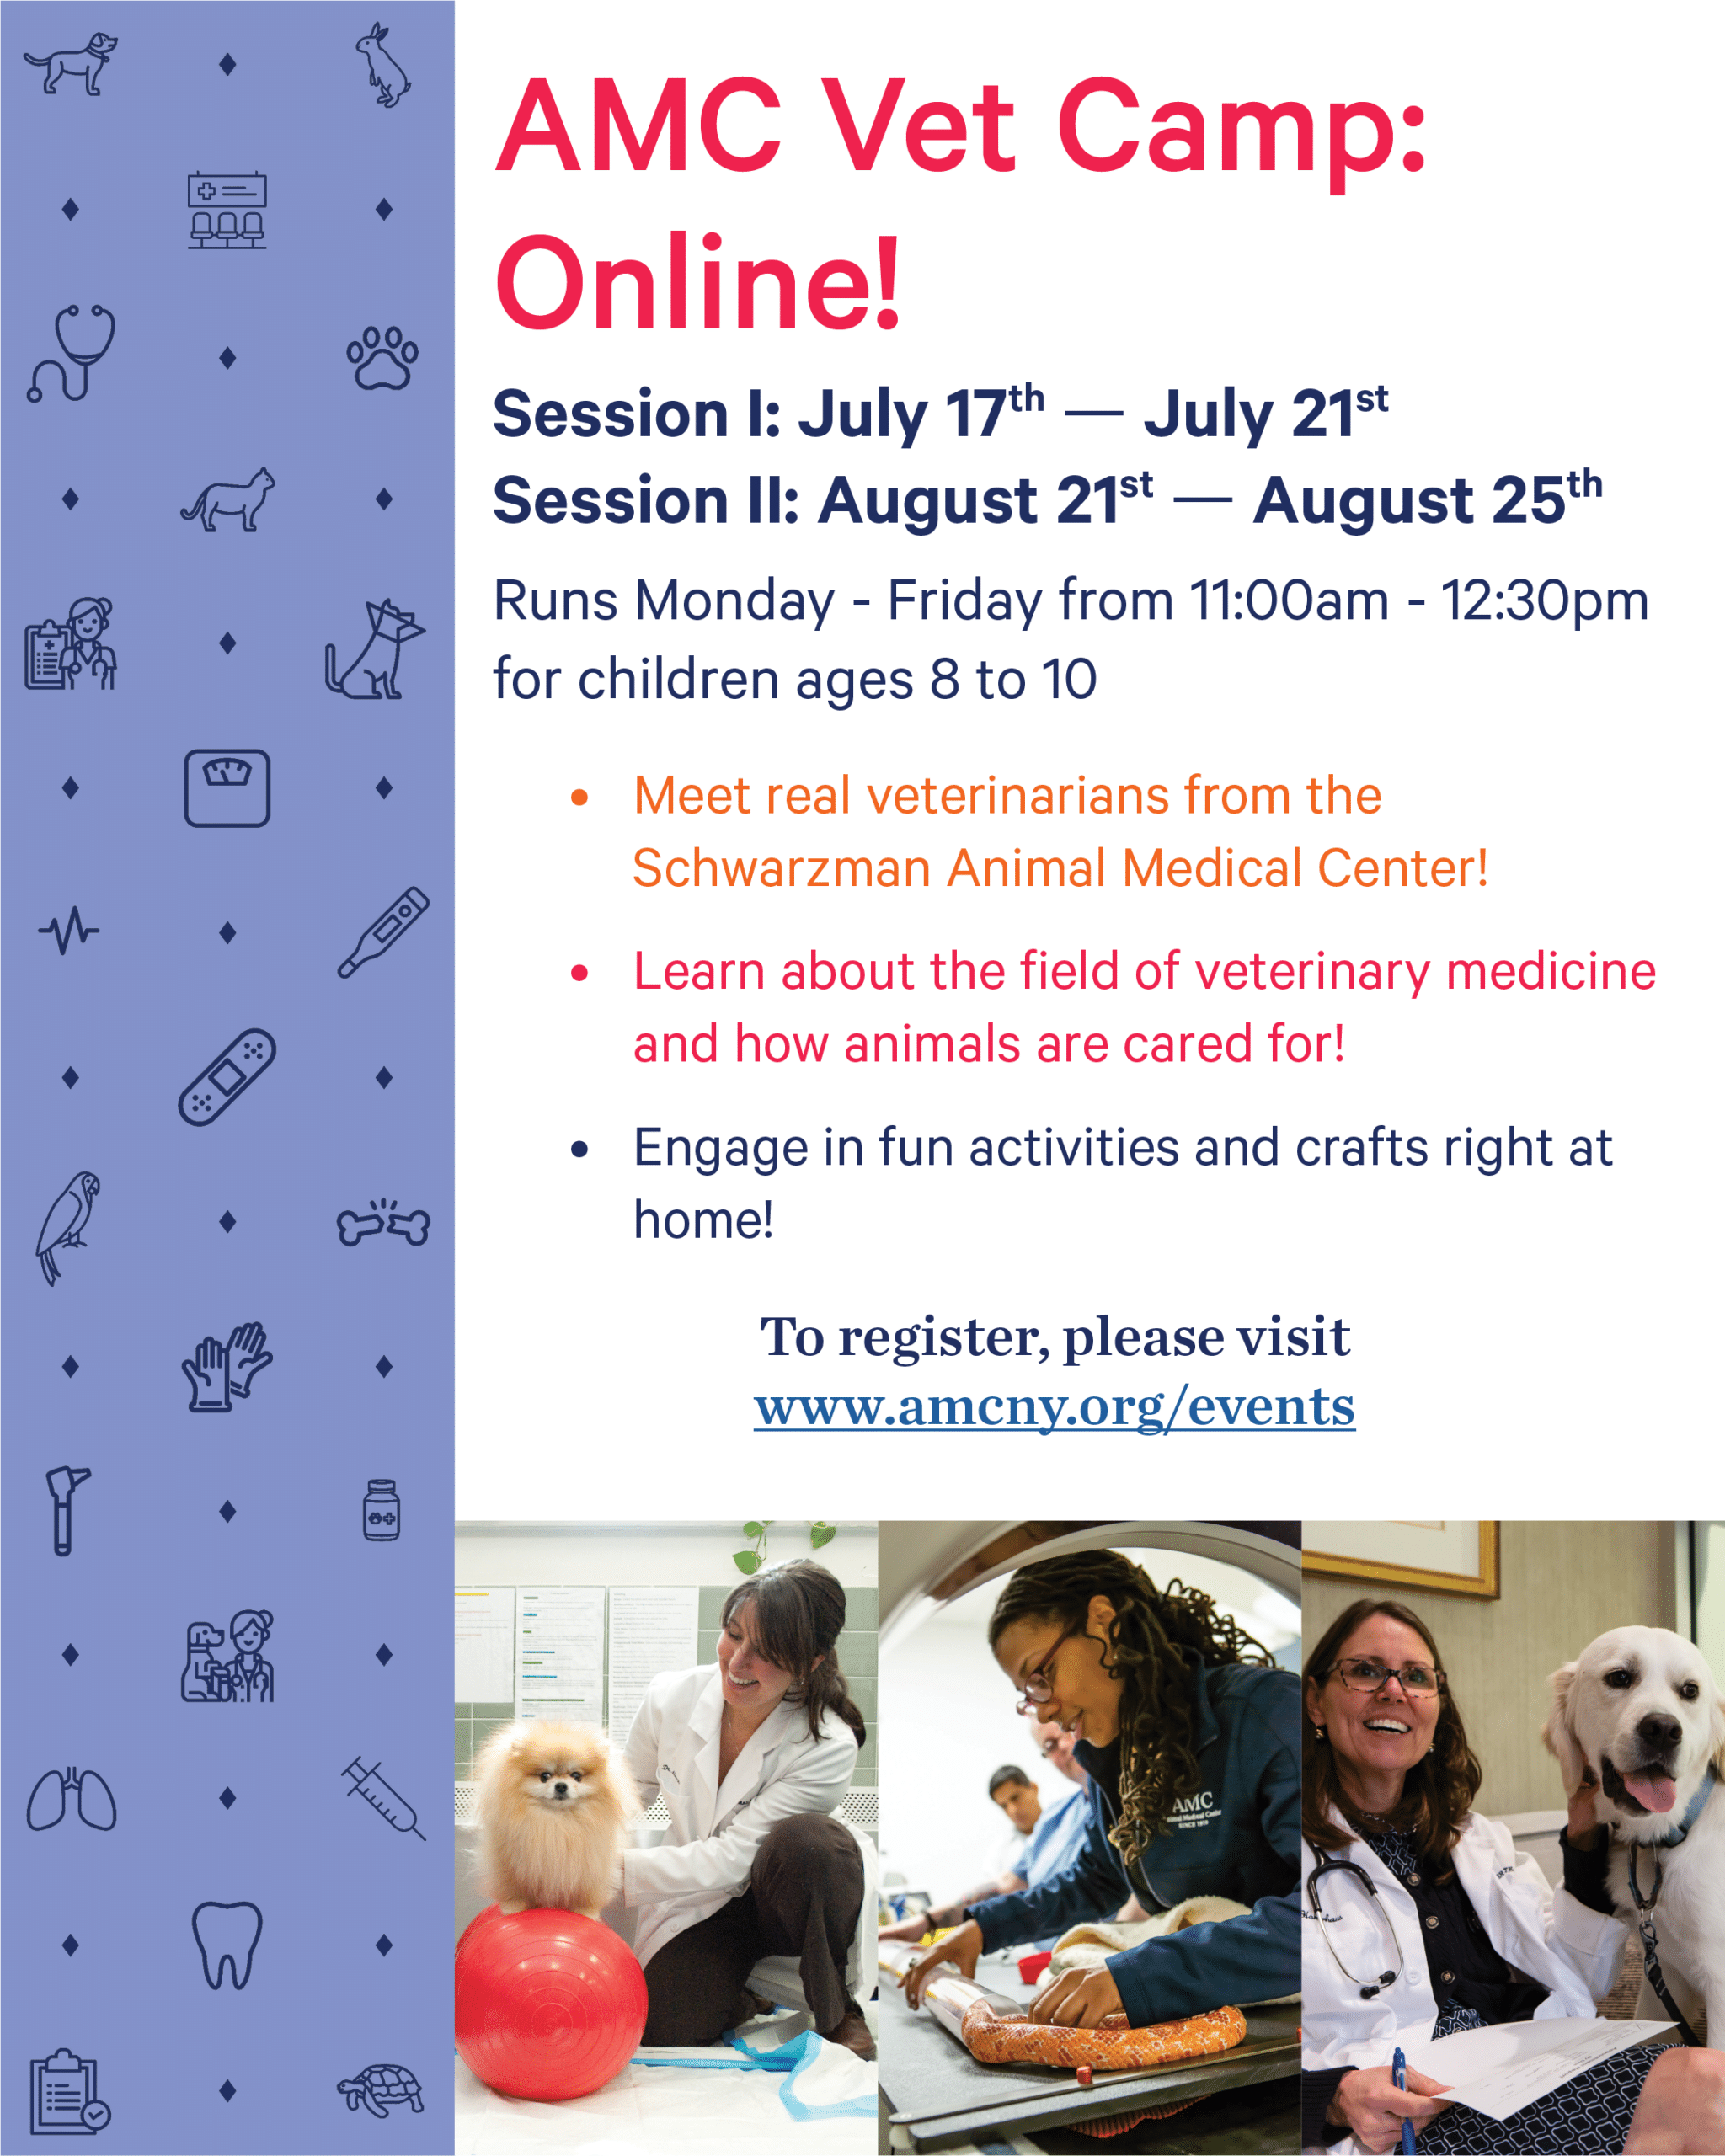 AMC Vet Camp: Online! Session 1: July 17th to July 21st. Session 2: August 21st to August 25th. Runs Monday through Friday from 11:00am to 12:30pm for children ages 8 to 10. Meet real veterinarians from the Schwarzman Animal Medical Center! Learn about the field of veterinary medicine and how animals are cared for! Engage in fun activities and crafts right at home! To register, please visit amcny.gbtesting.us/events